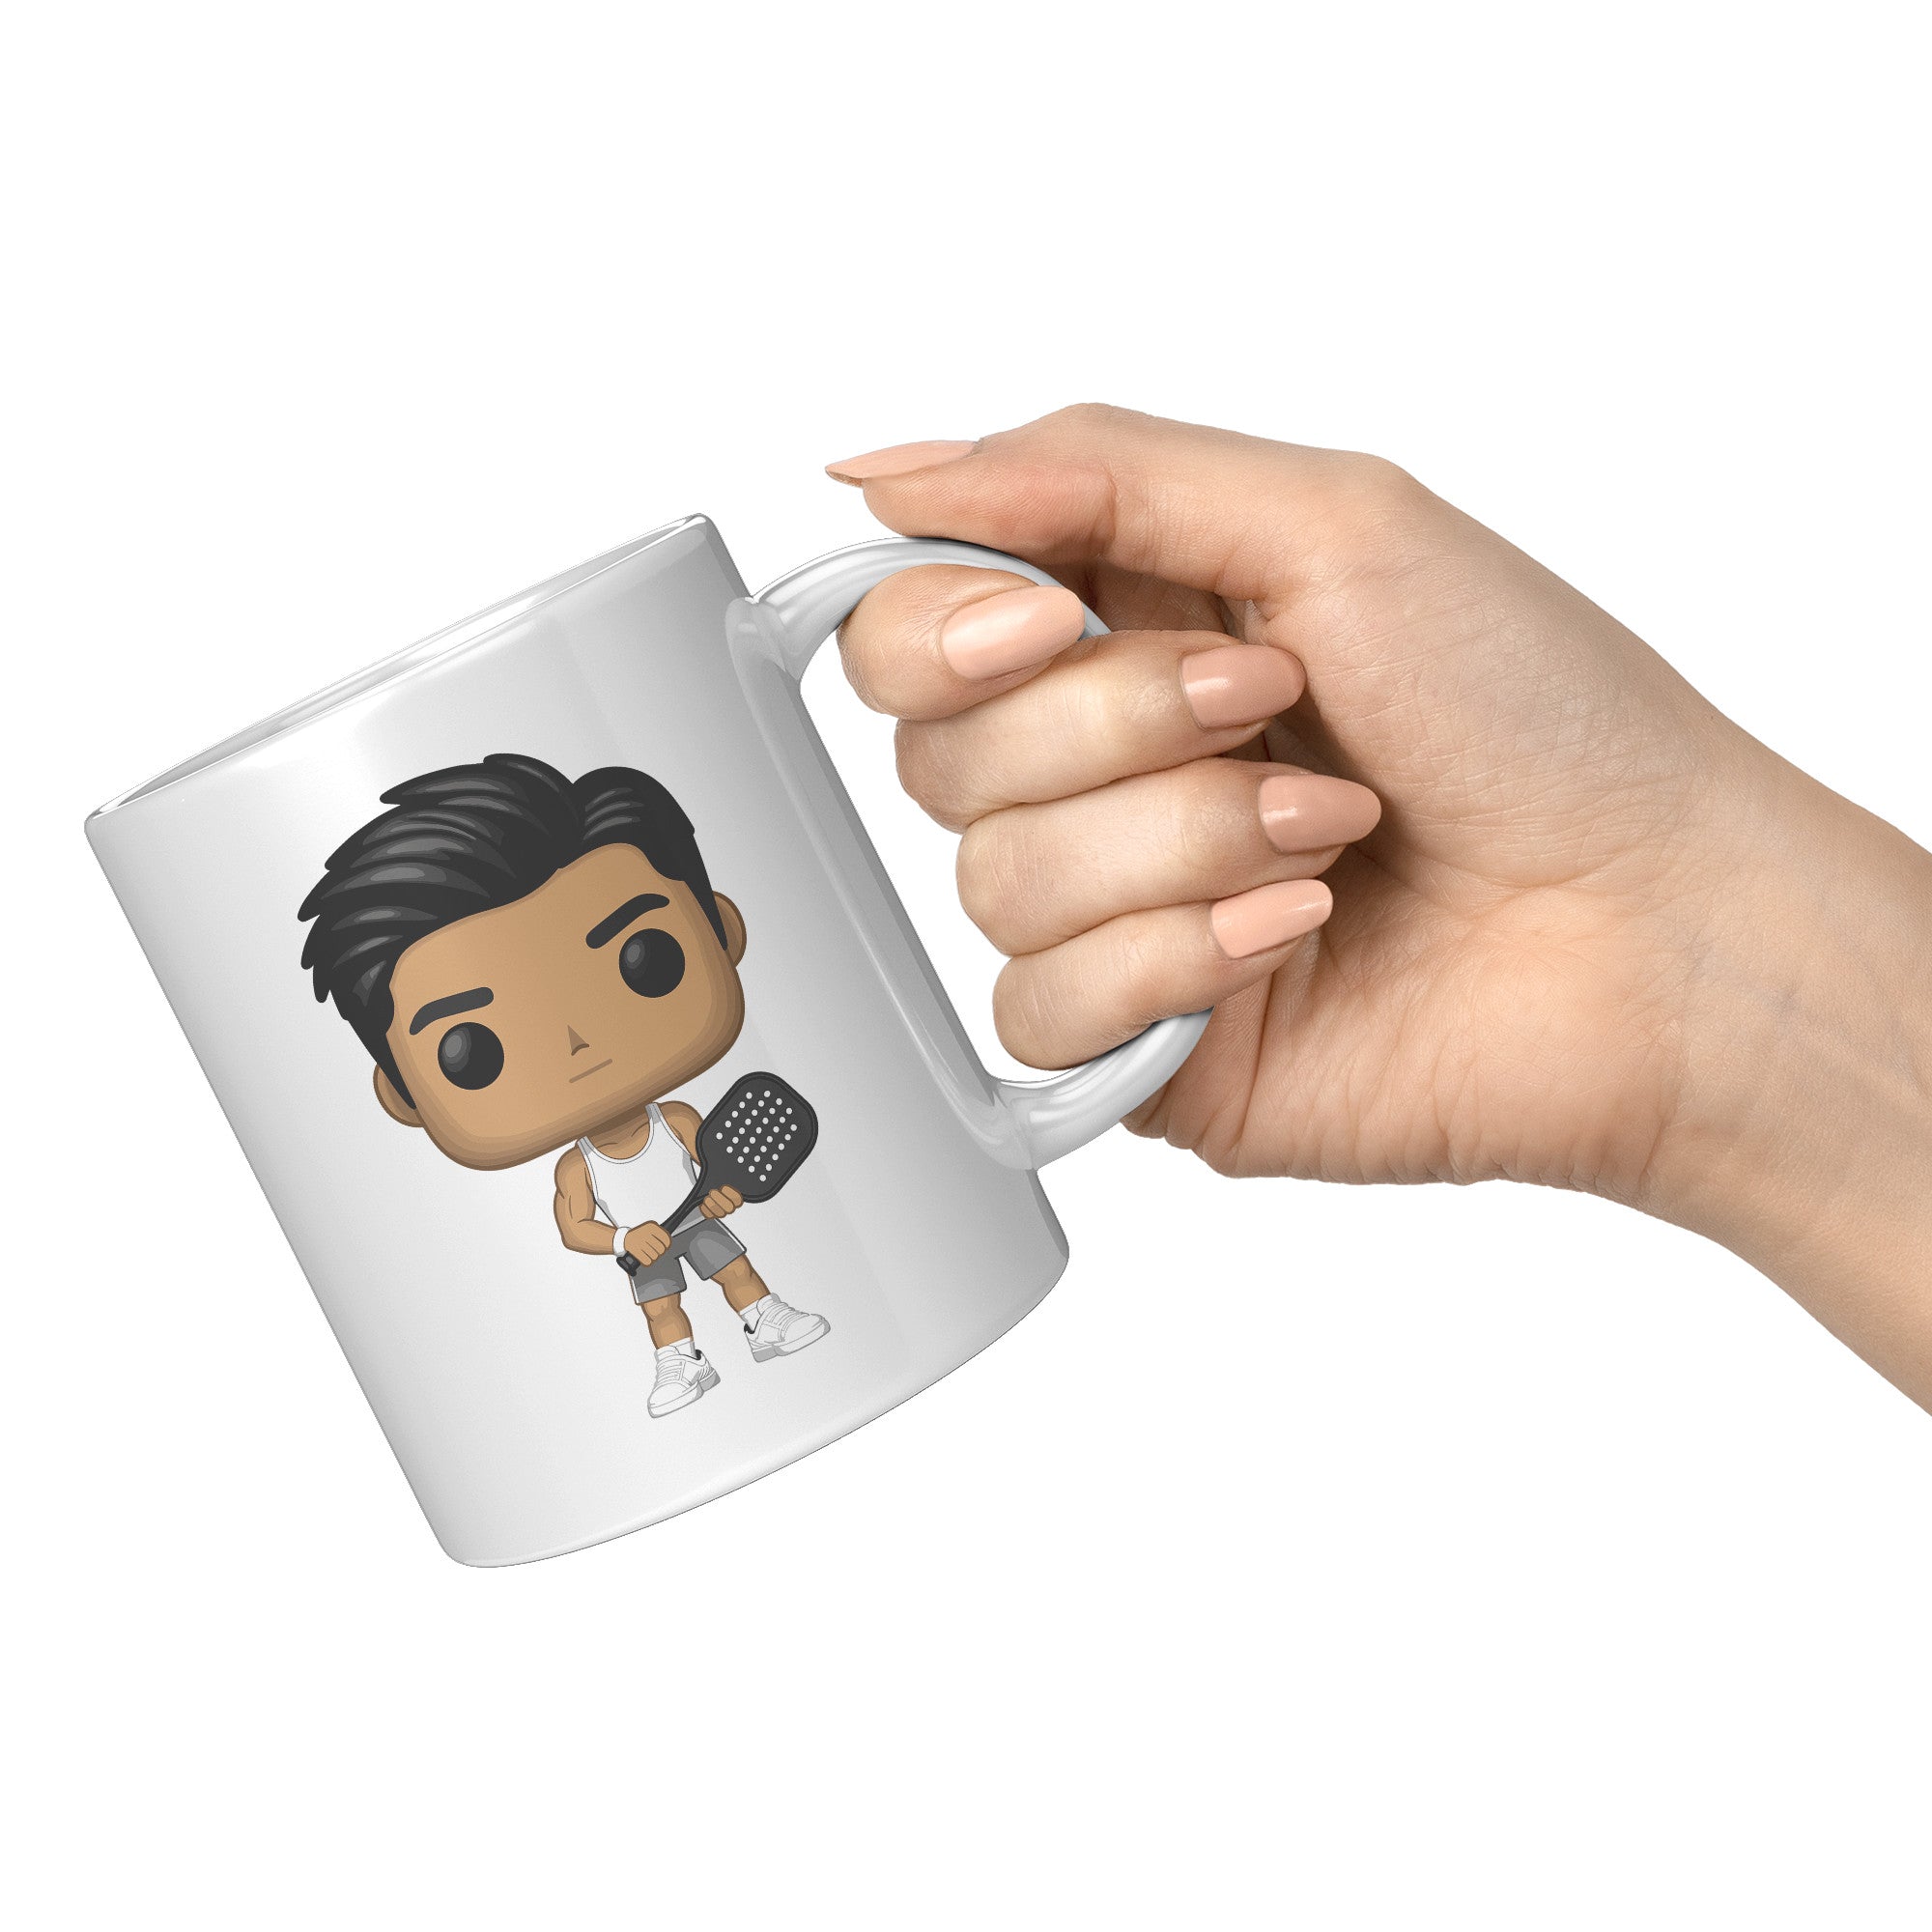 "Funko Pop Style Pickle Ball Player Boy Coffee Mug - Cute Athletic Cup - Perfect Gift for Pickle Ball Enthusiasts - Sporty Boy Apparel" - A